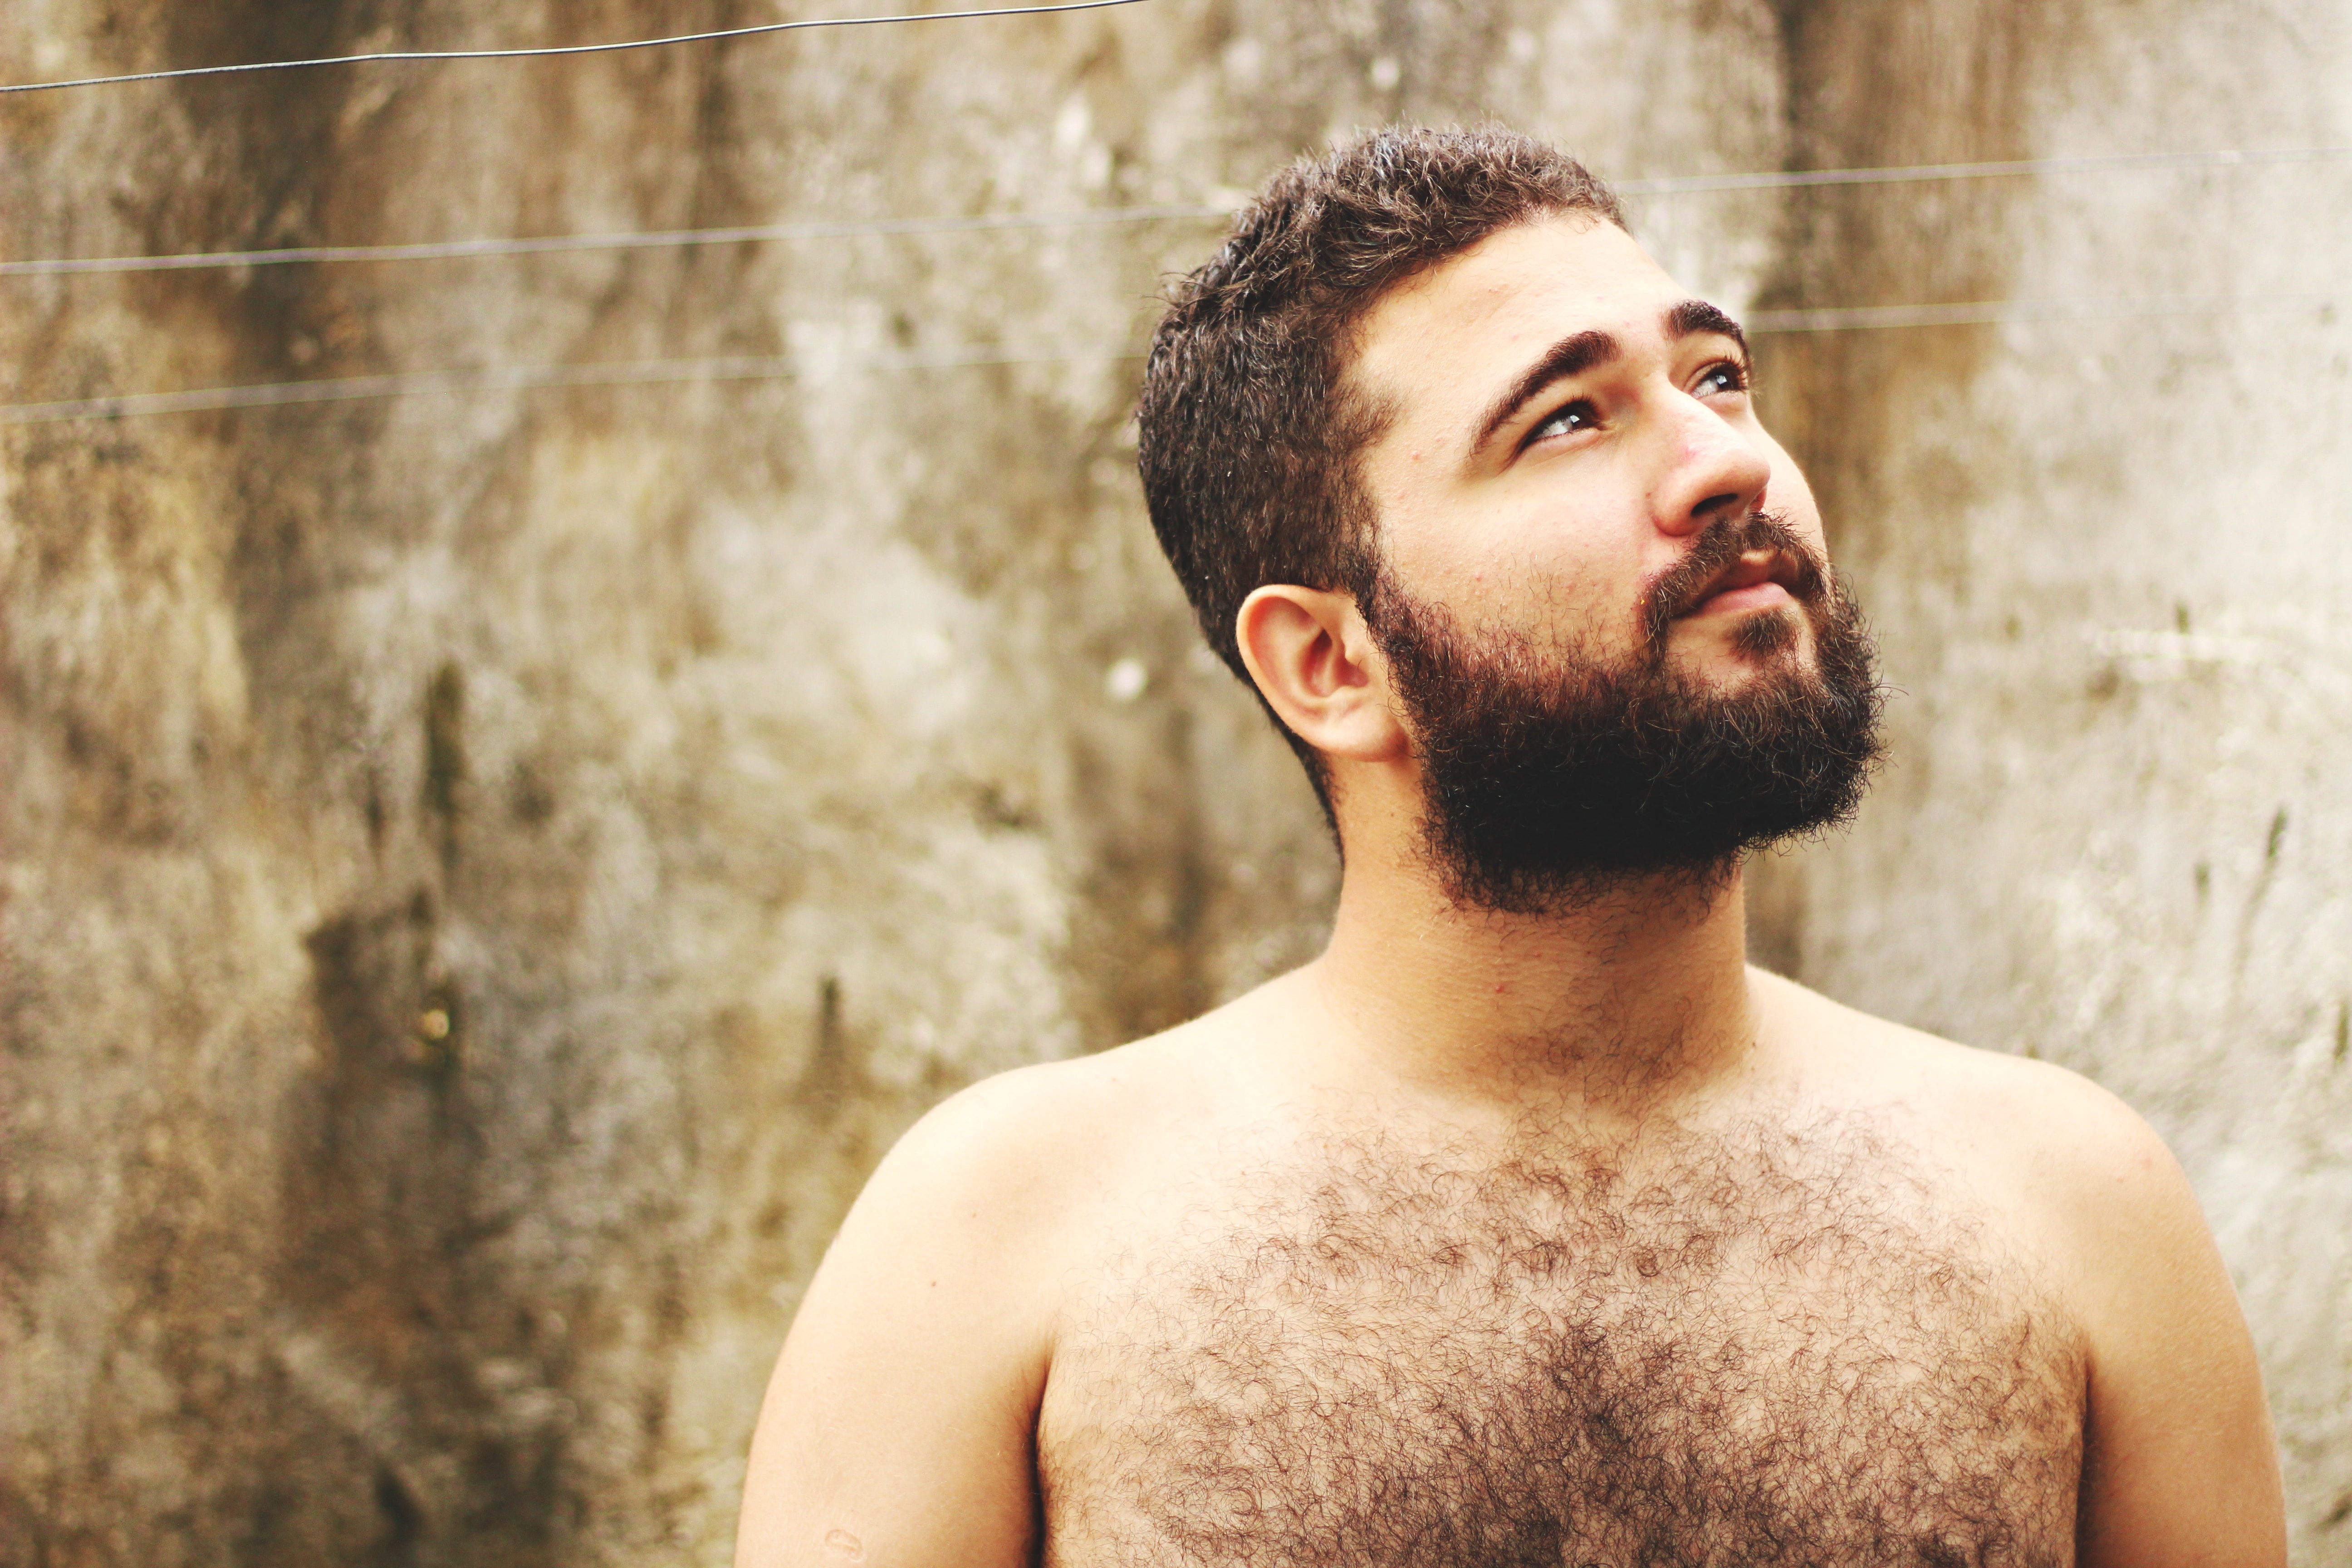 Body Hair Loss: Reasons Why Your Body Hair is Falling Out